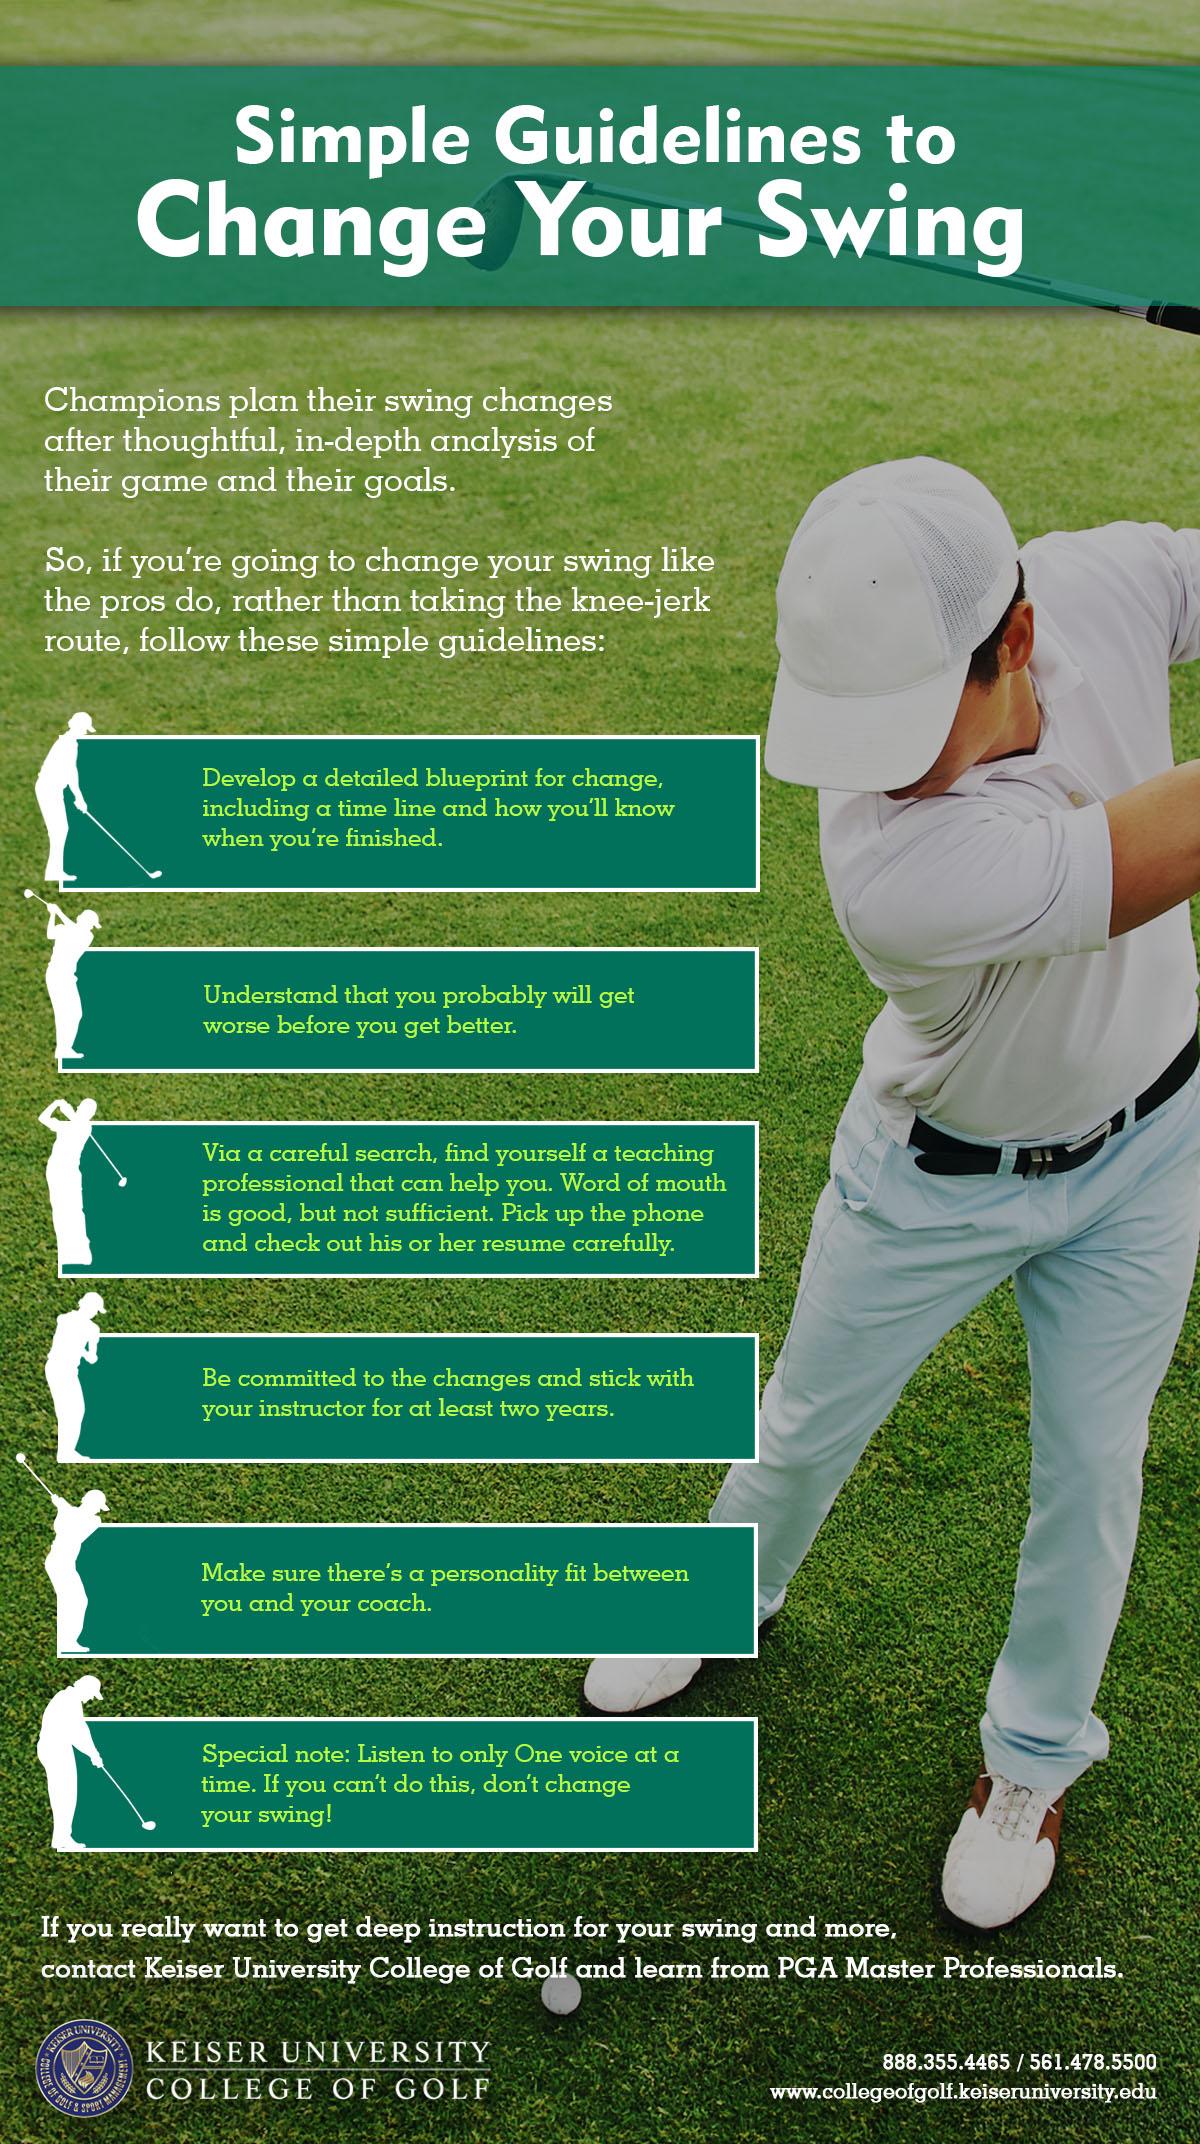 Simple Guidelines to Change Your Swing